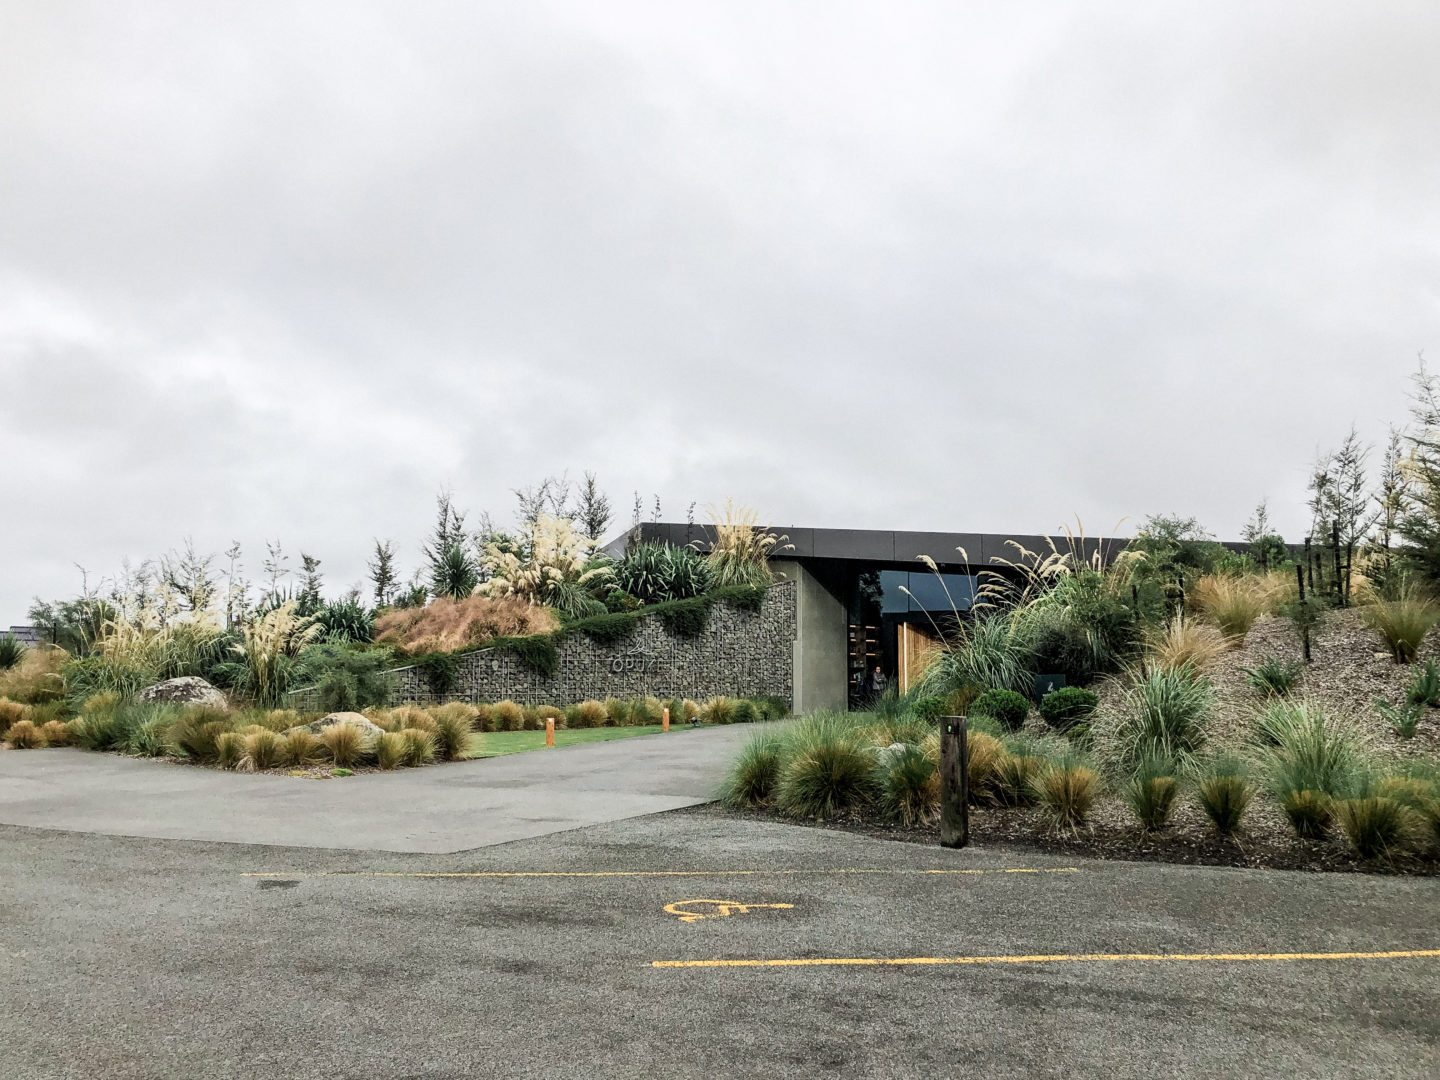 Exterior of the Ōpuke Thermal Pools and Spa. The modern building has been cleverly built so it appears to be rising out of the ground with native plants all over it.